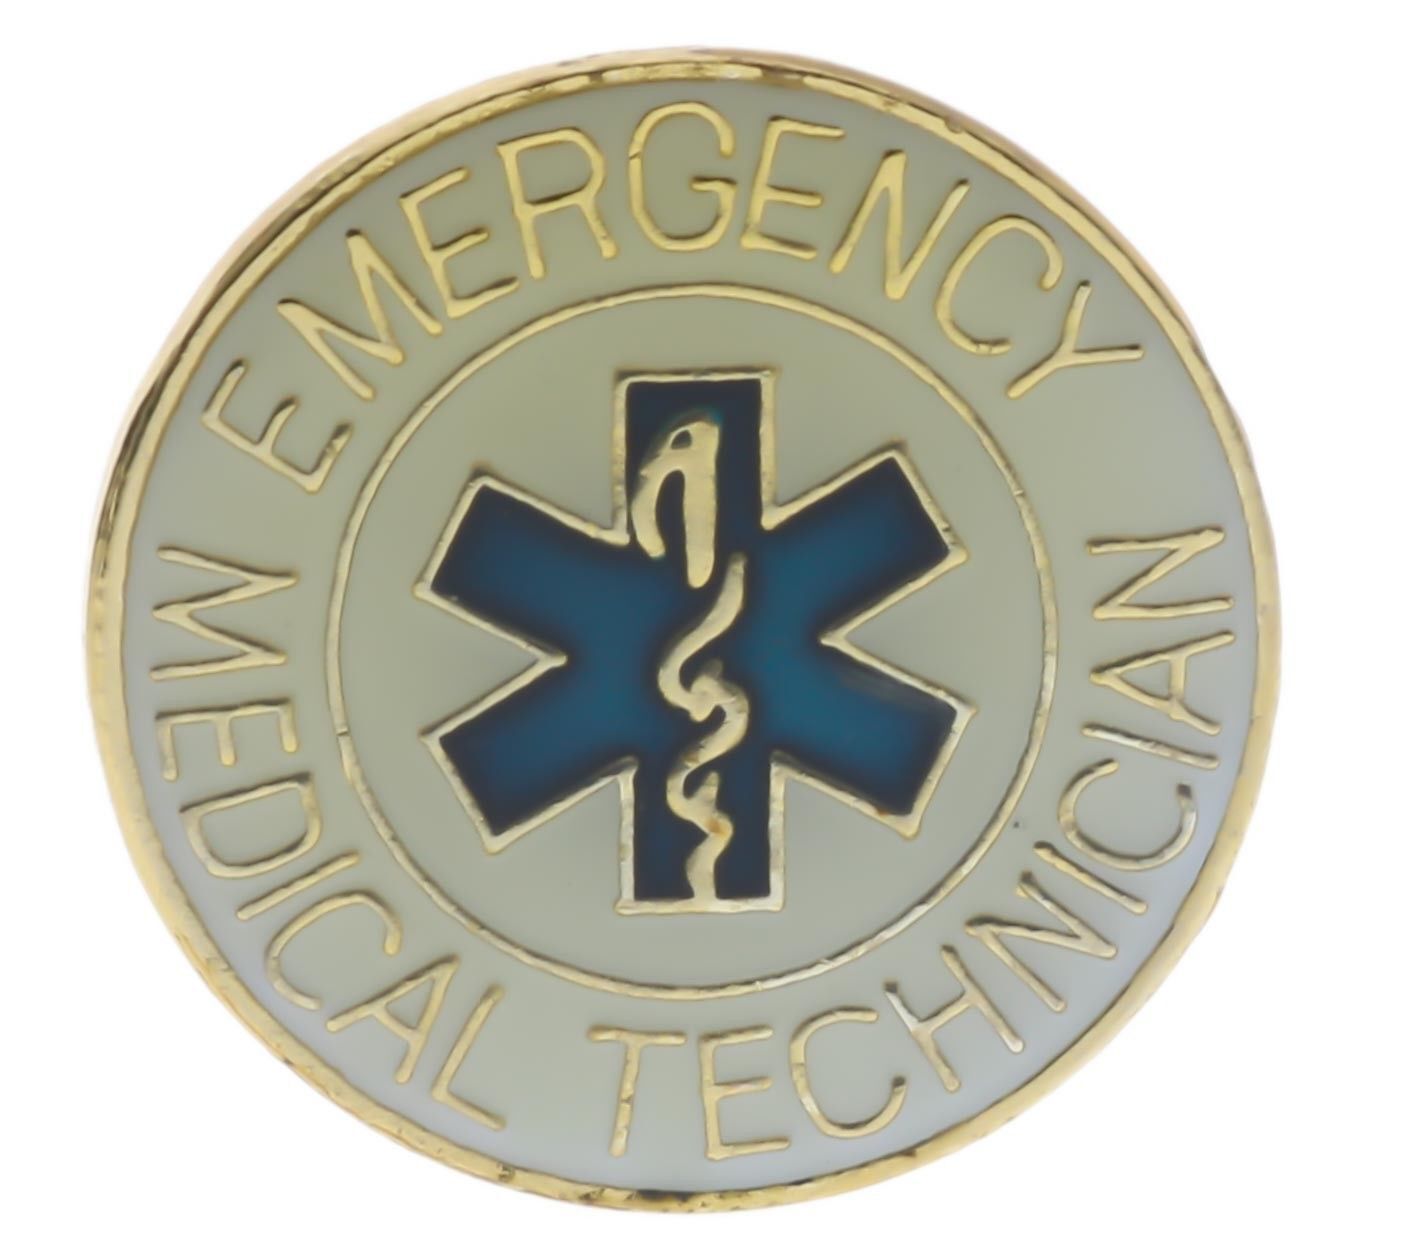 EMT Emergency Star of Life Blue on White Gold Tone 1/2 inch Hat Pin AK932 F5D16H